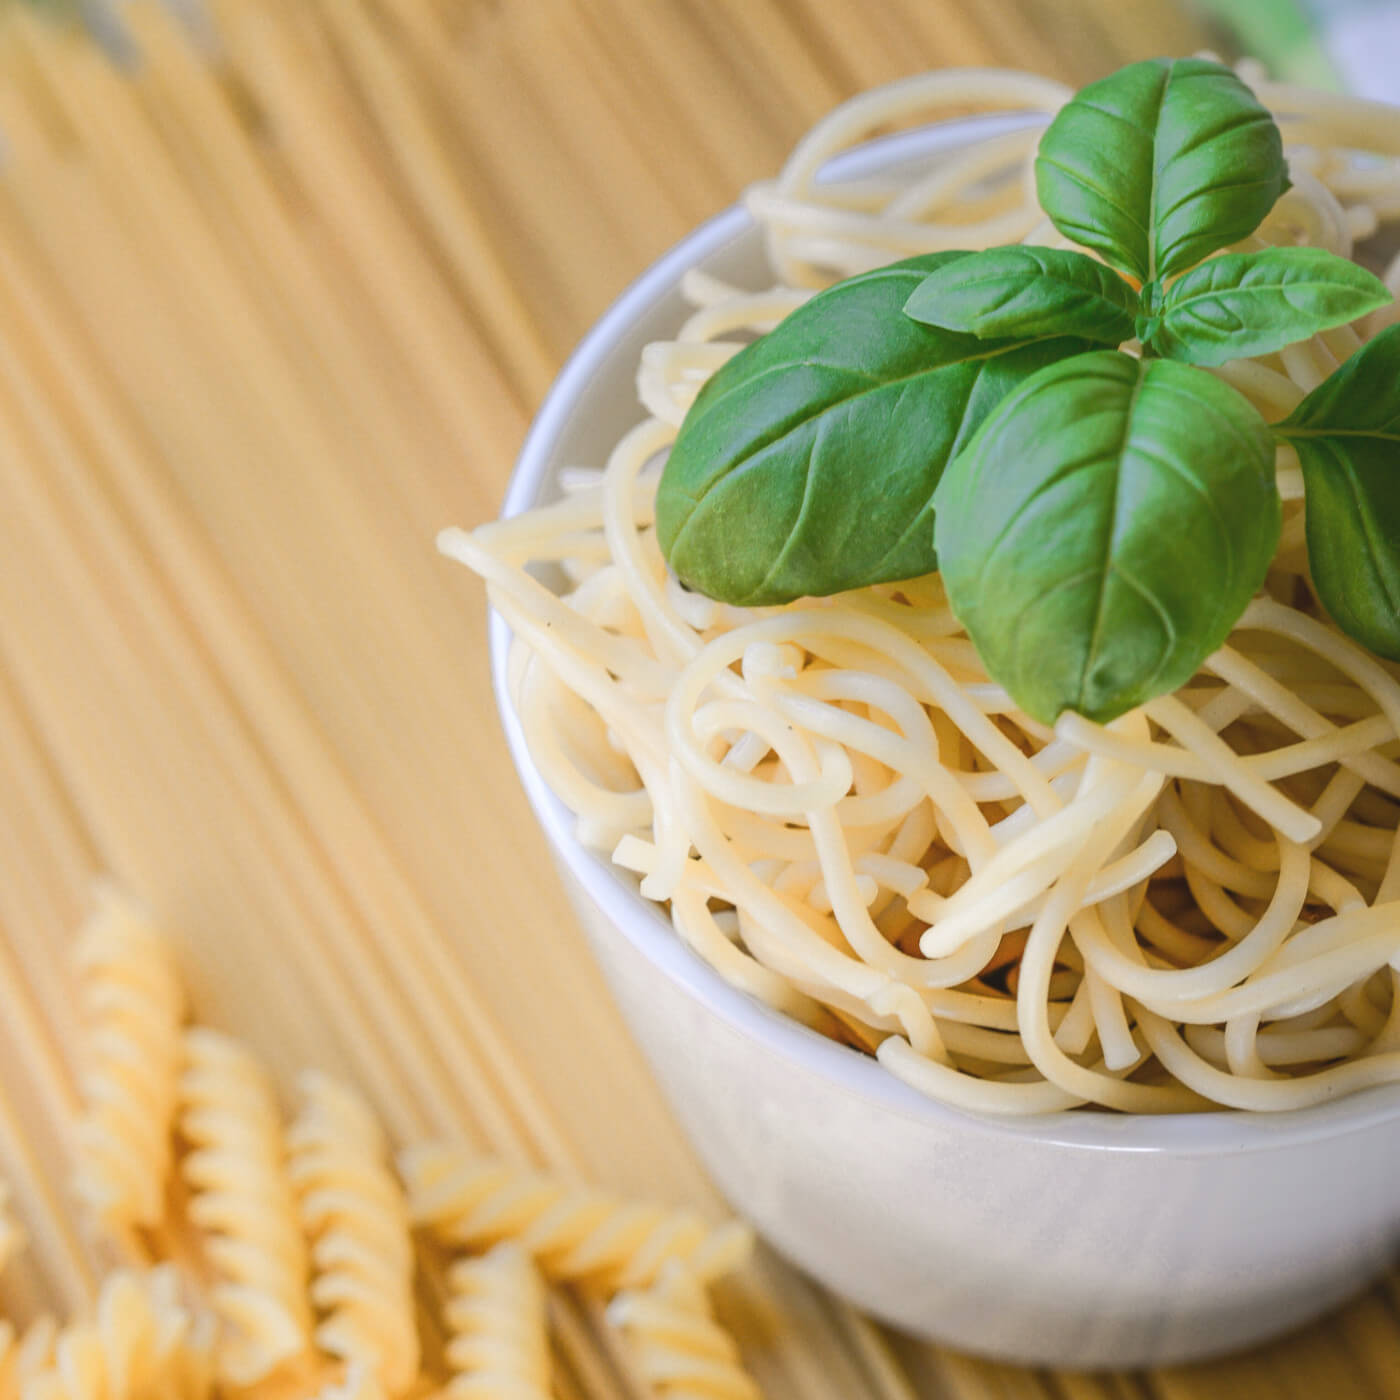 Bowl of pasta with a sprig of basil | Carbs after Bariatric Surgery article